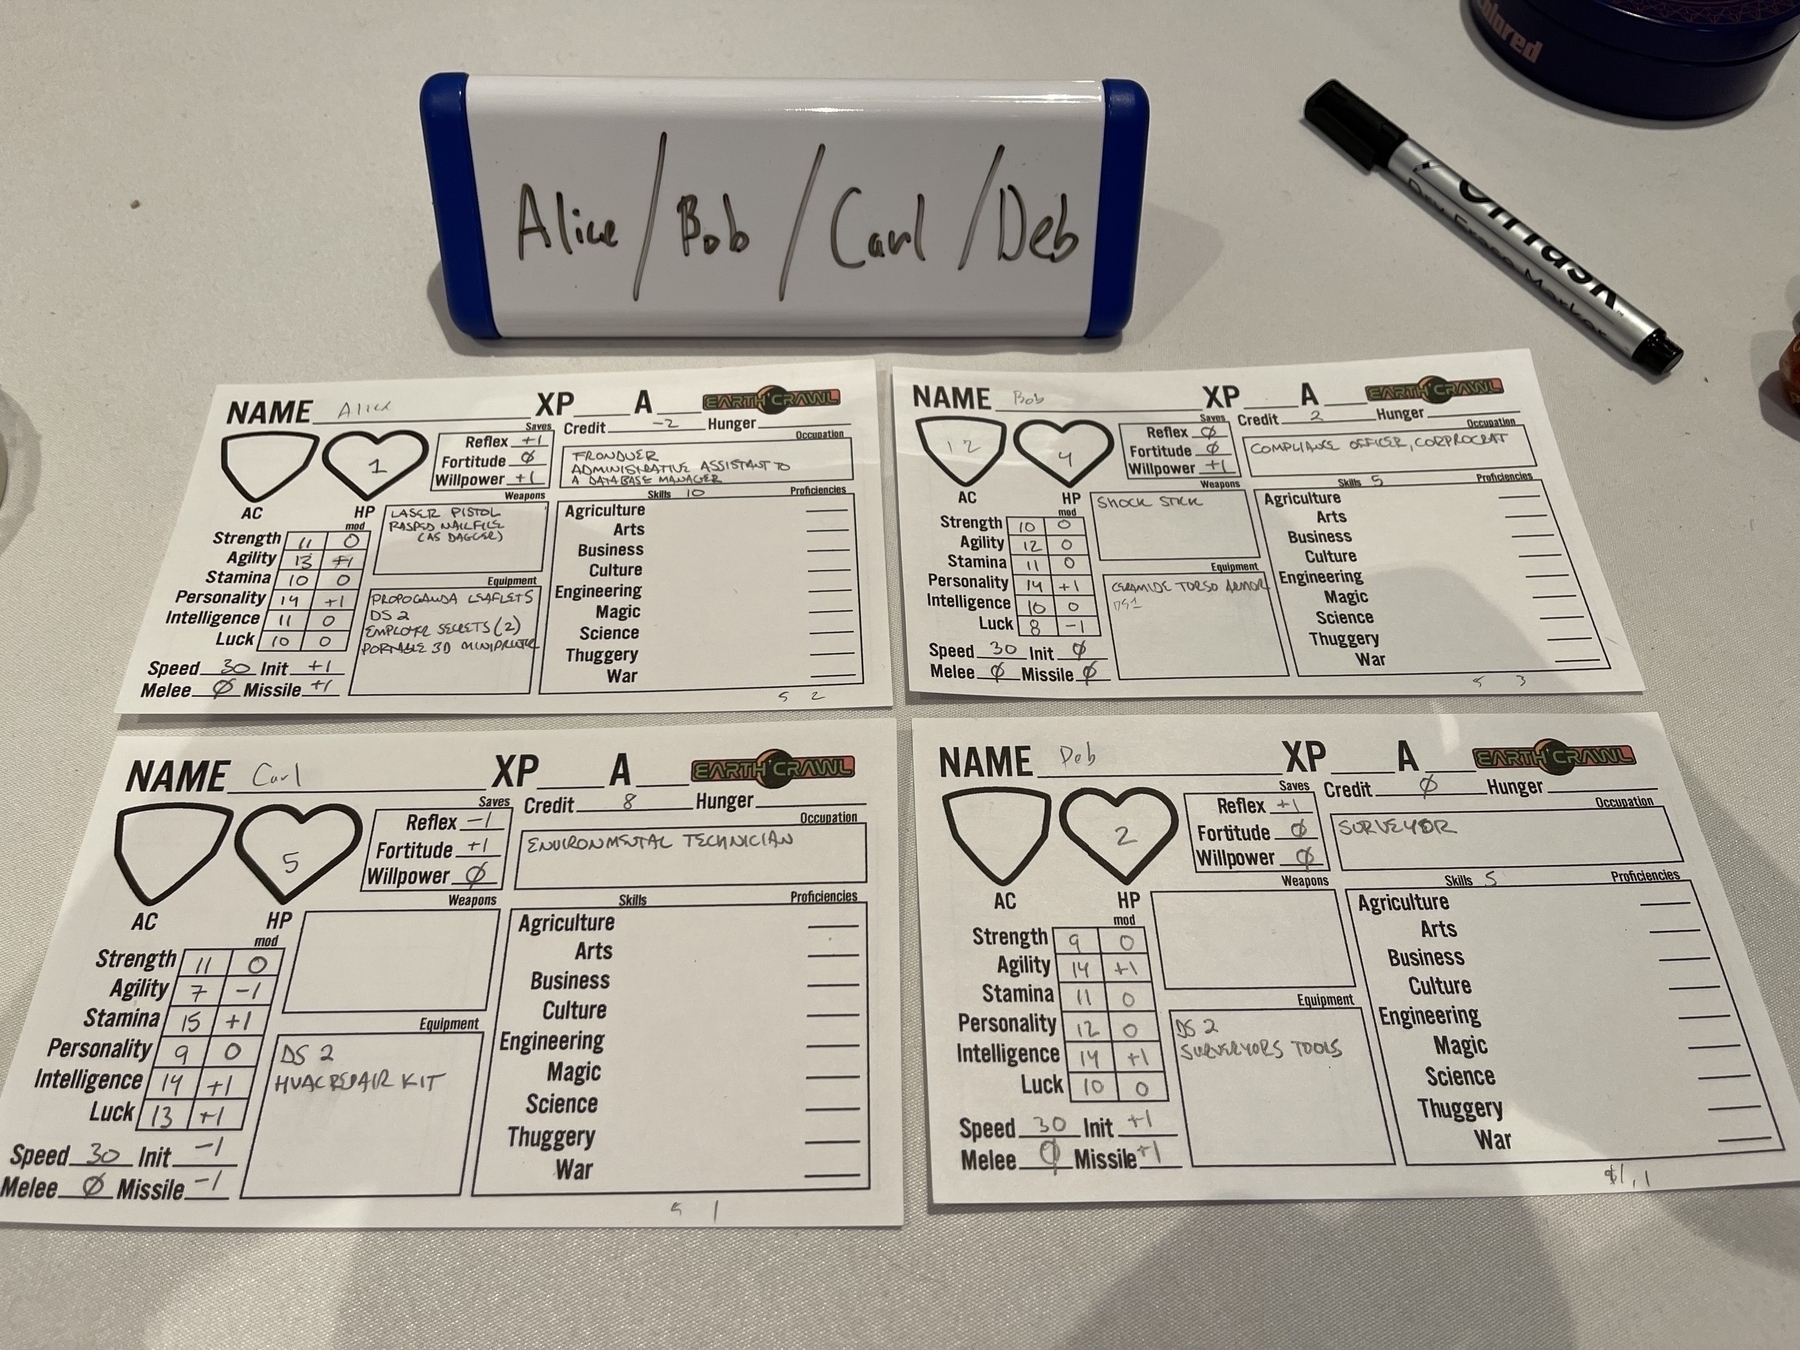 Four character sheets for Alice, Bob, Carl, and Deb